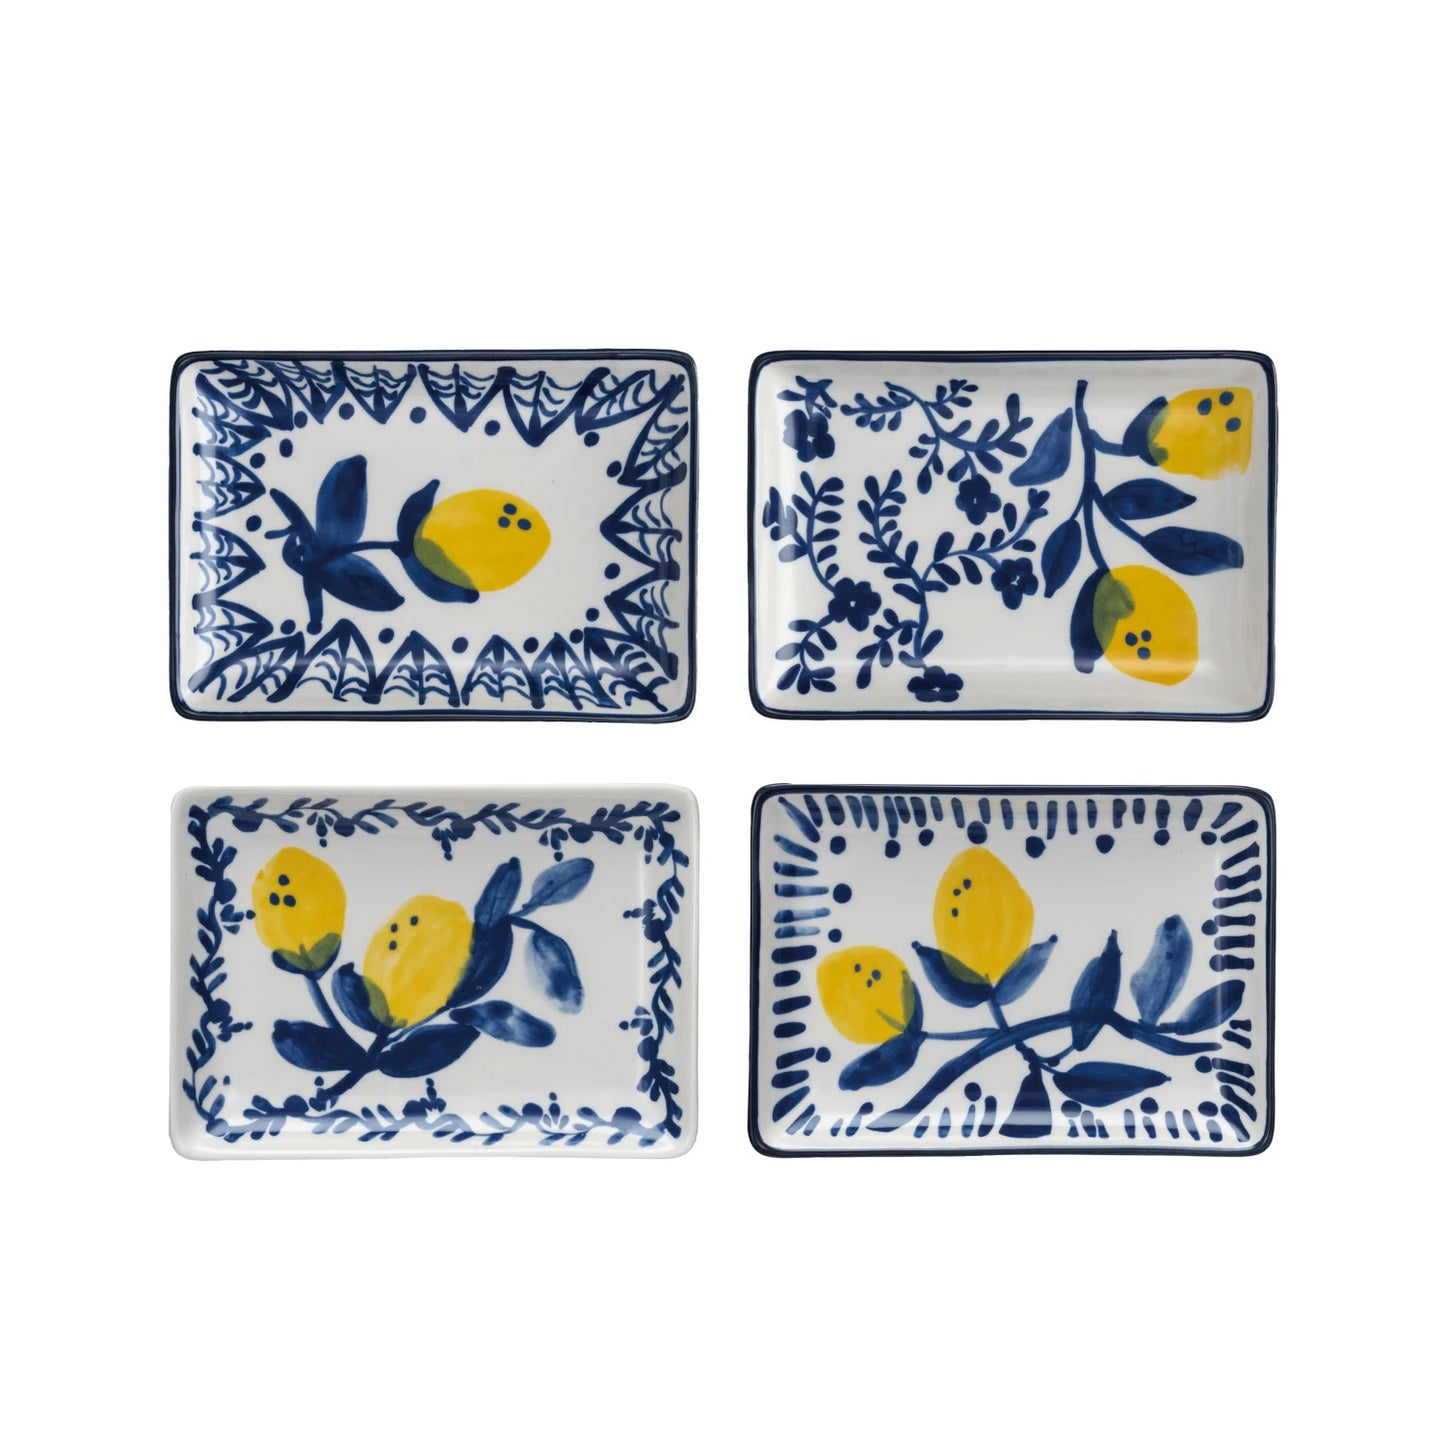 4 sytles of blue and white dishes with lemons painted on them.